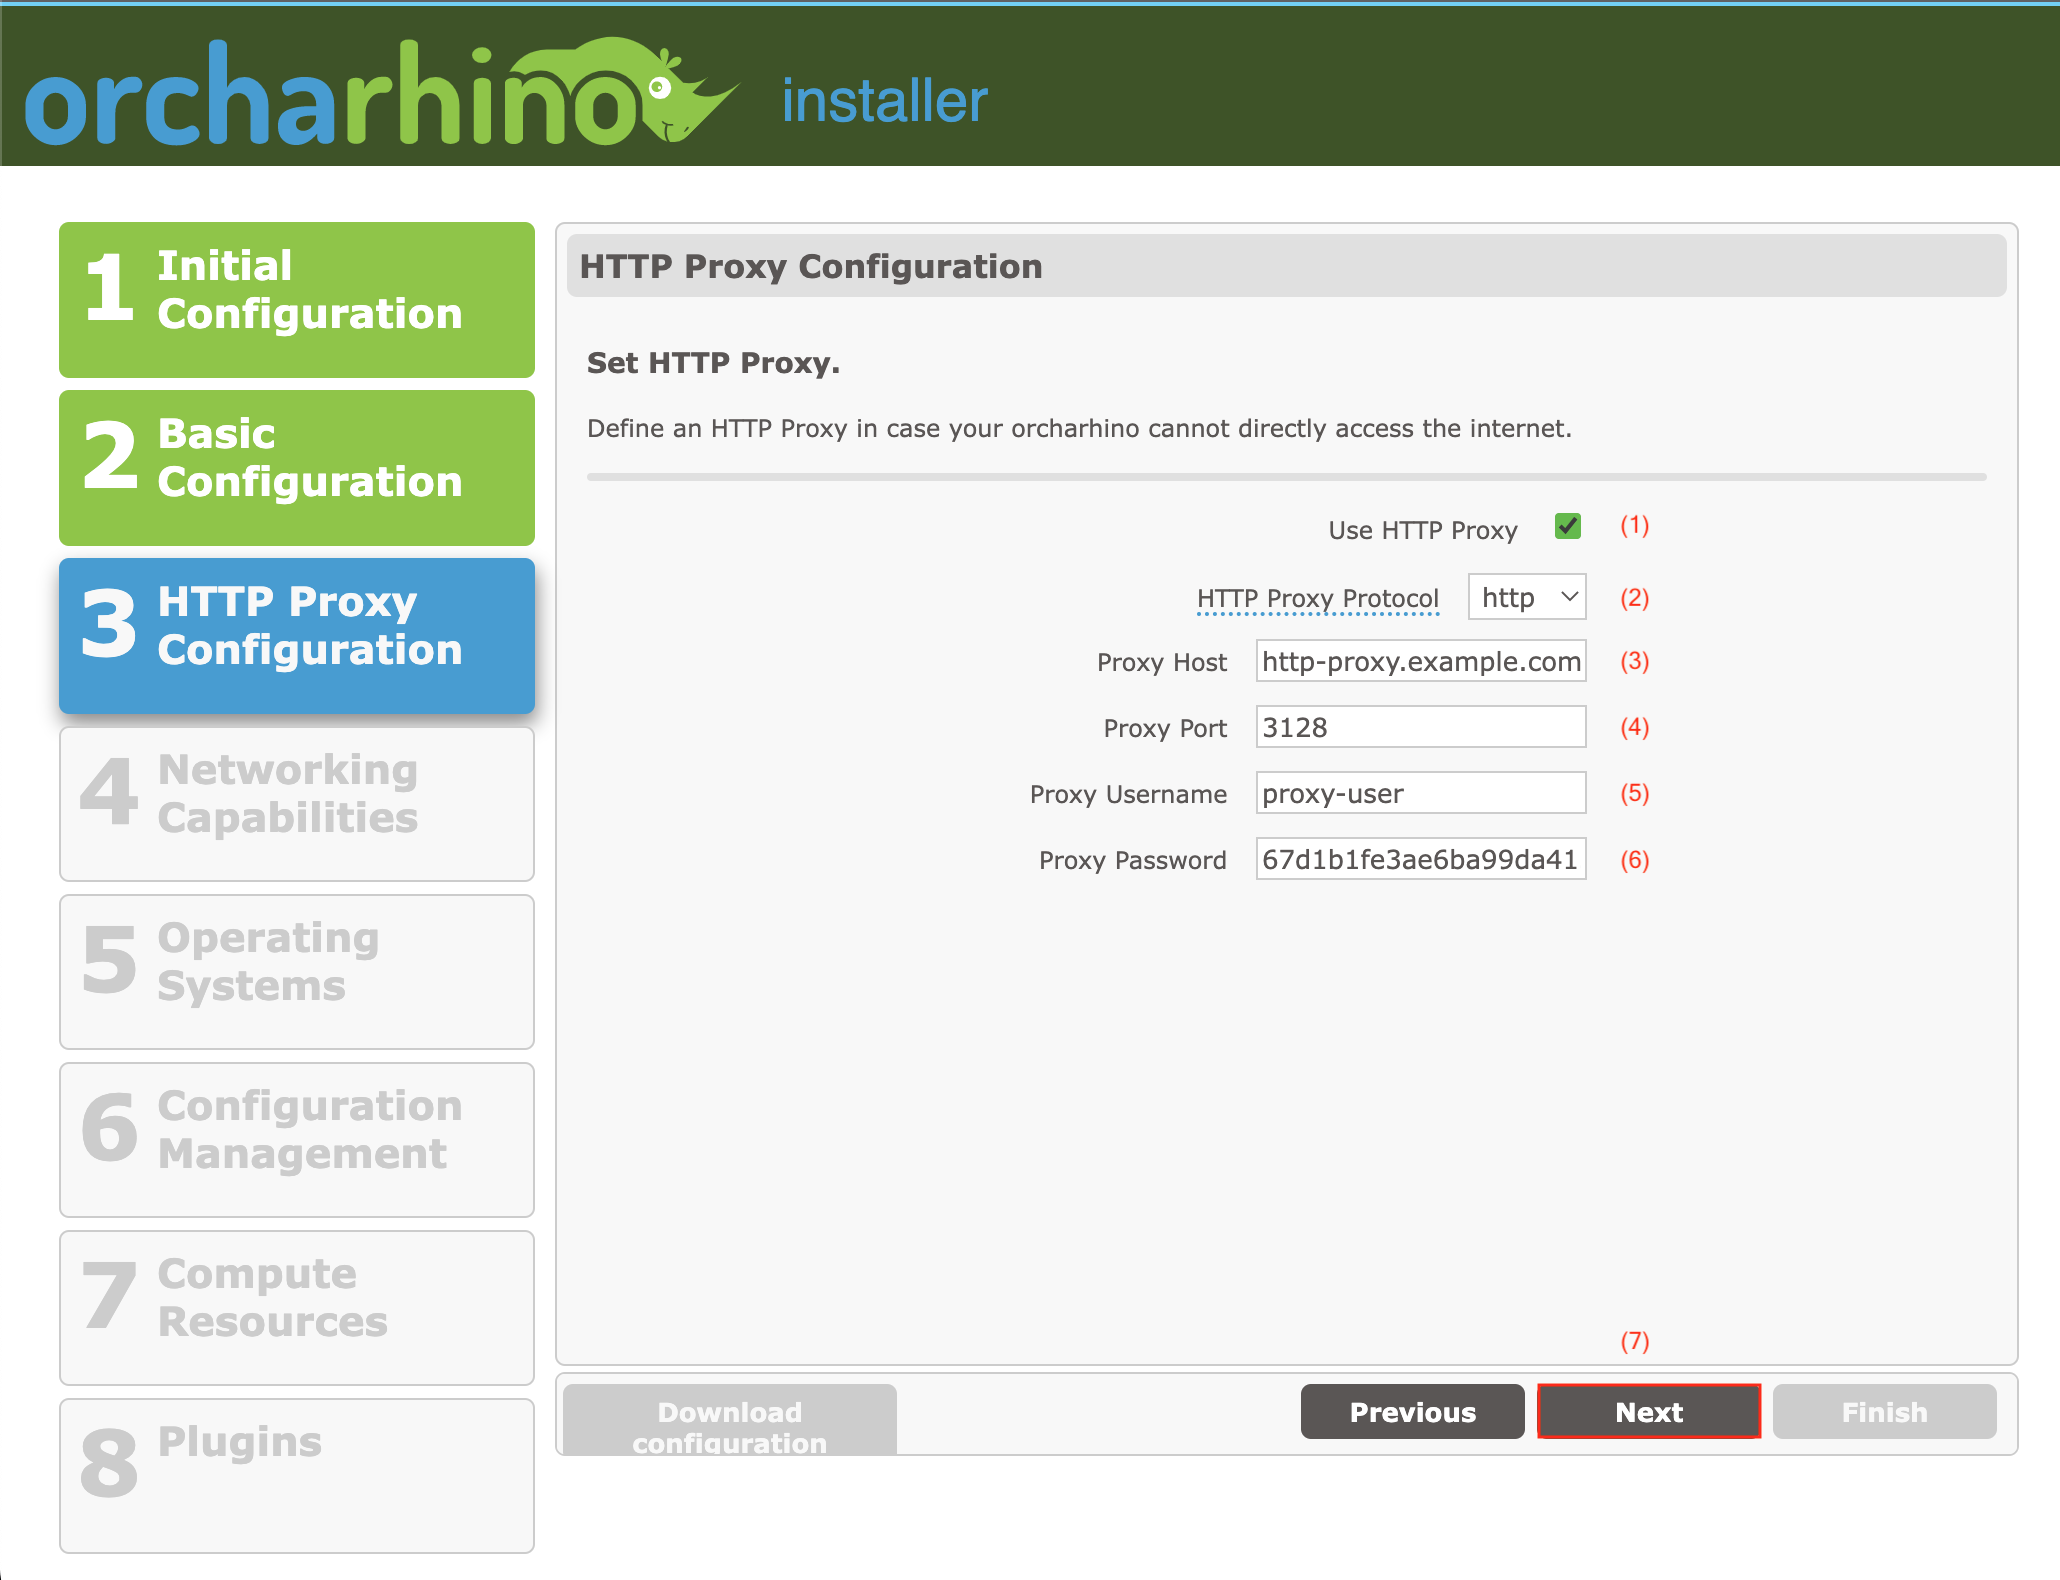 Setting HTTP proxy configuration in orcharhino Web Installer